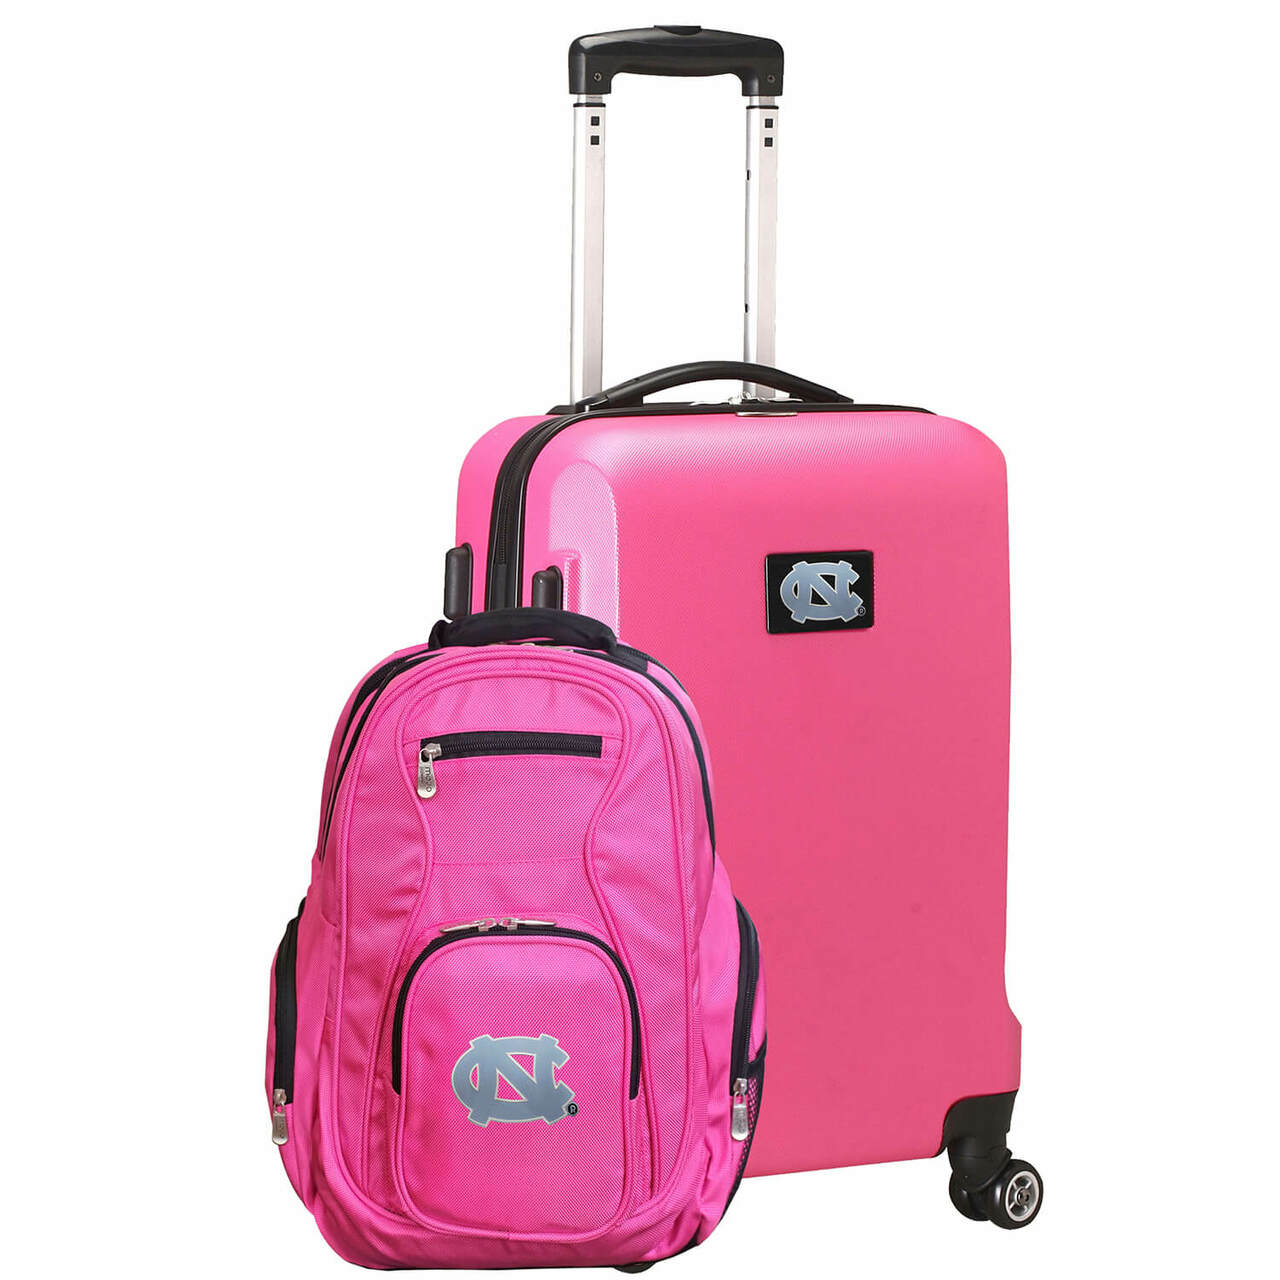 UNC Tar Heels Deluxe 2-Piece Backpack and Carry on Set in Pink